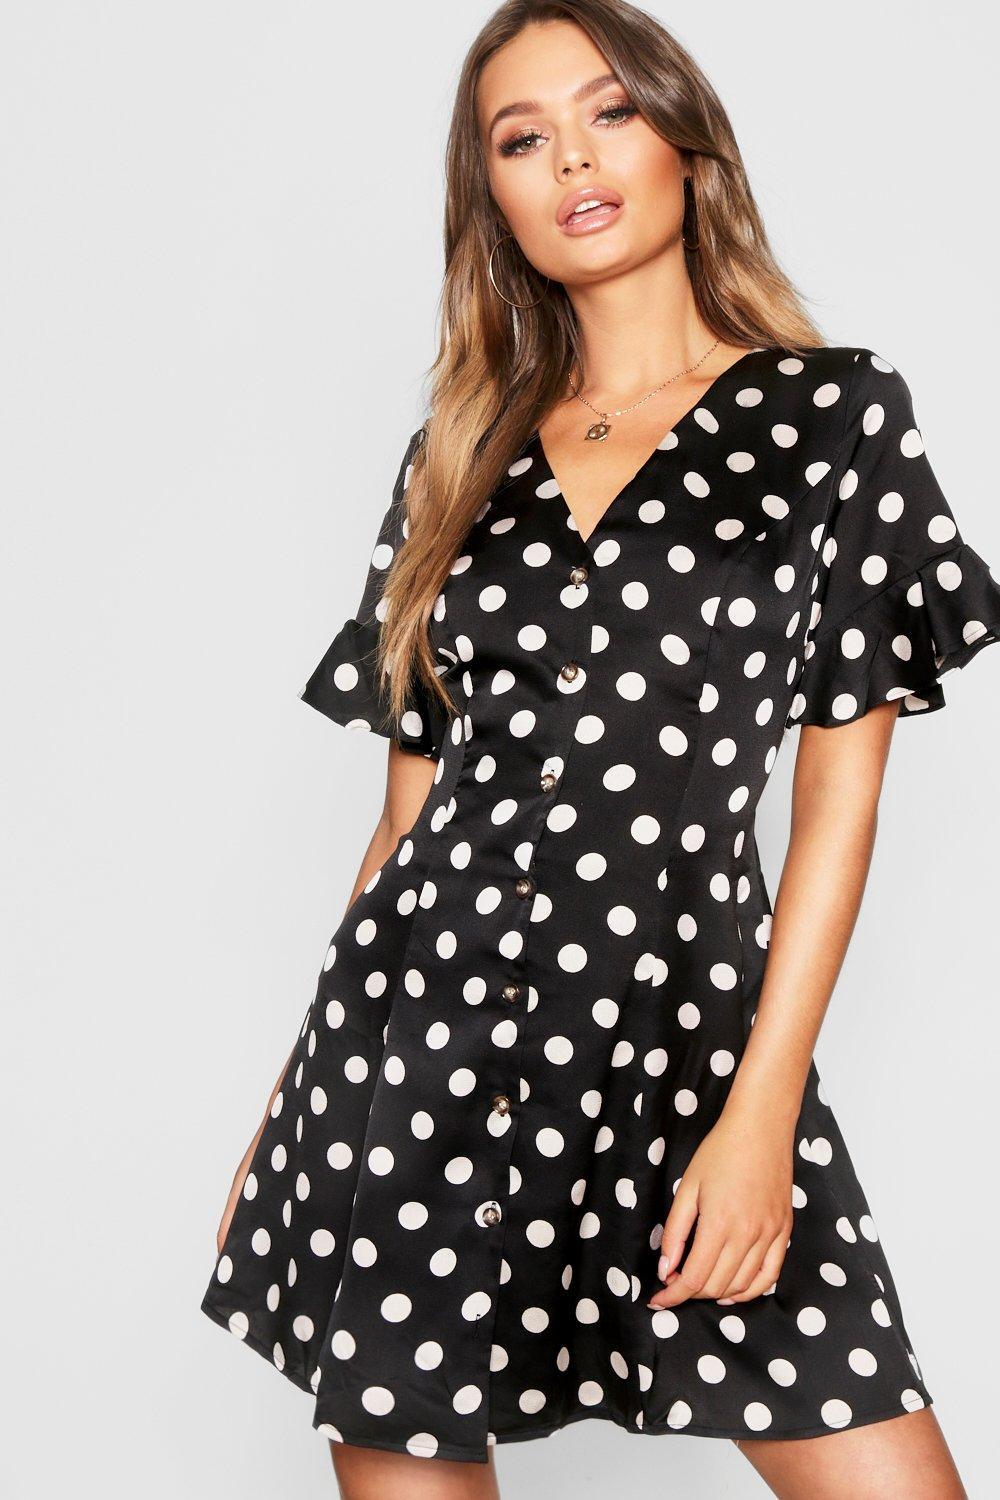 Lyst - Boohoo Button Front Polka Dot Flared Sleeve Shift Dress in Black